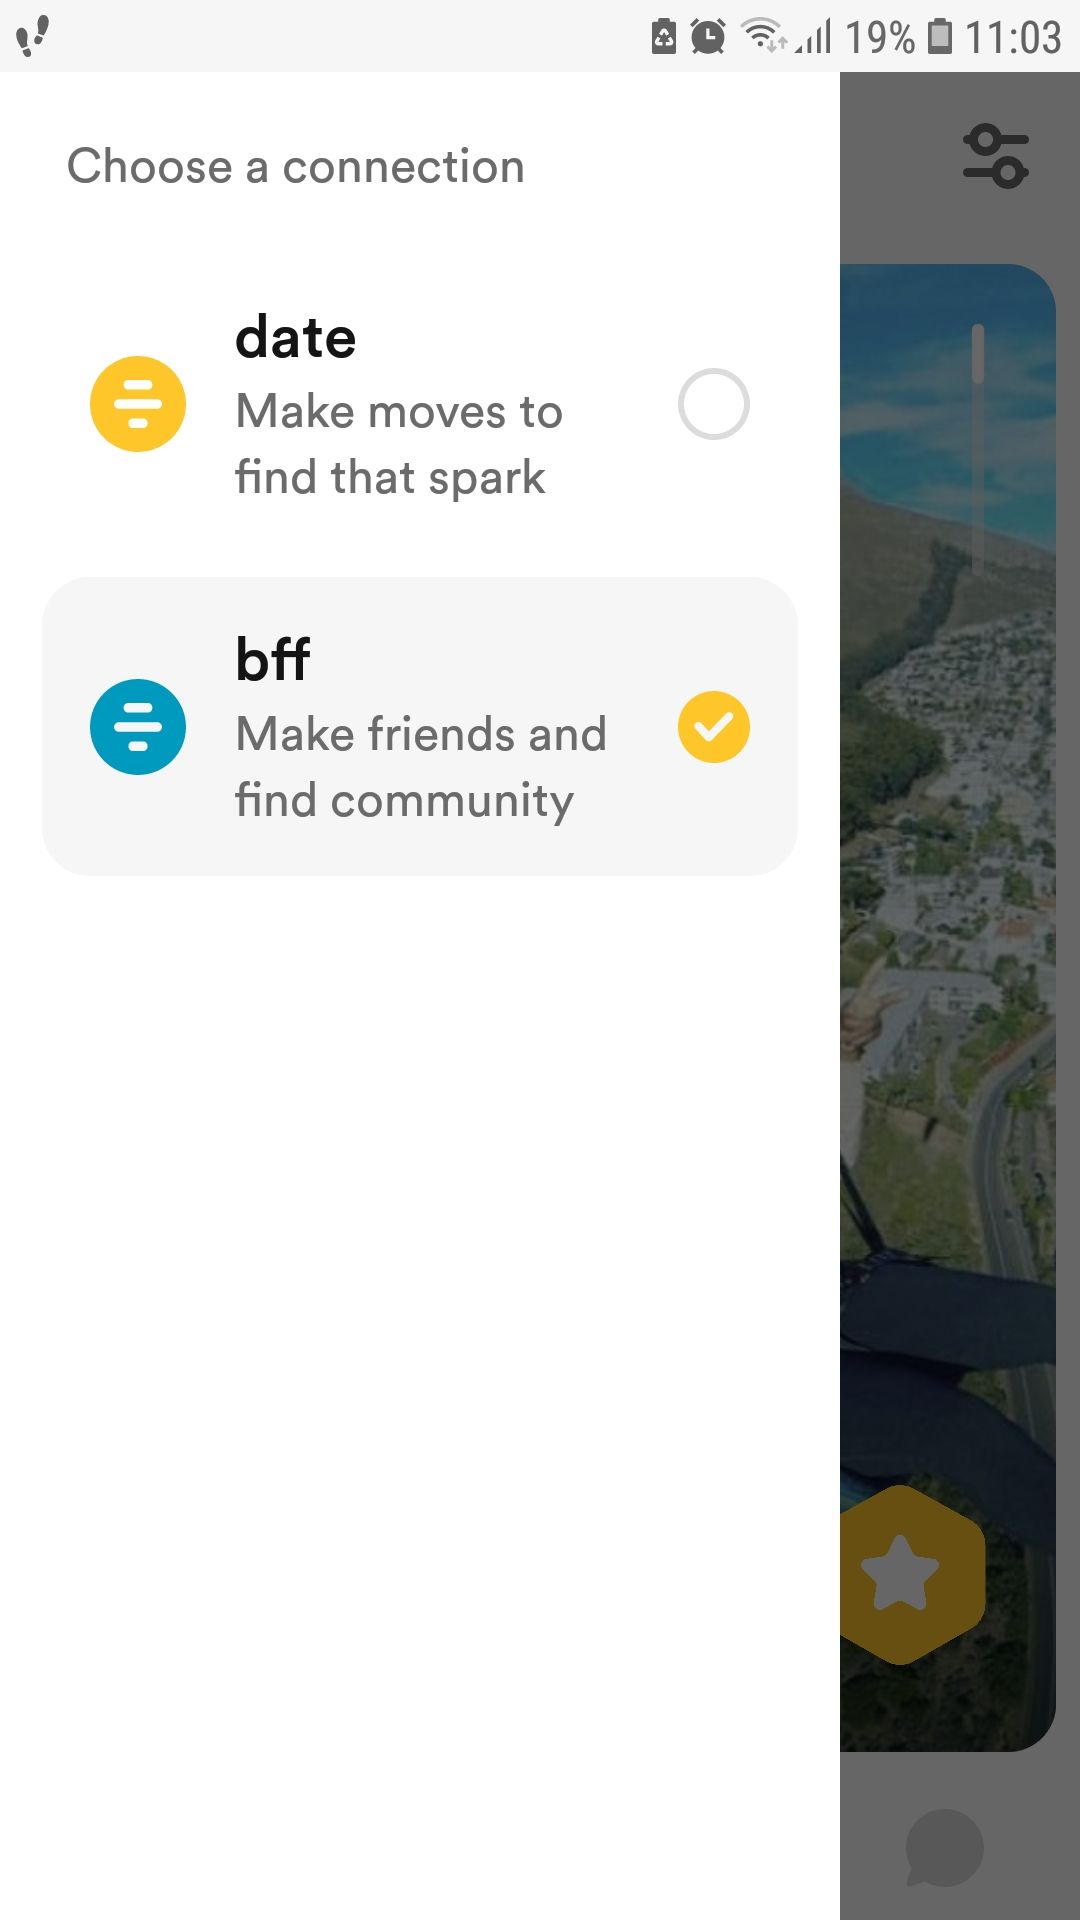 Bumble BFF mobile friendship app